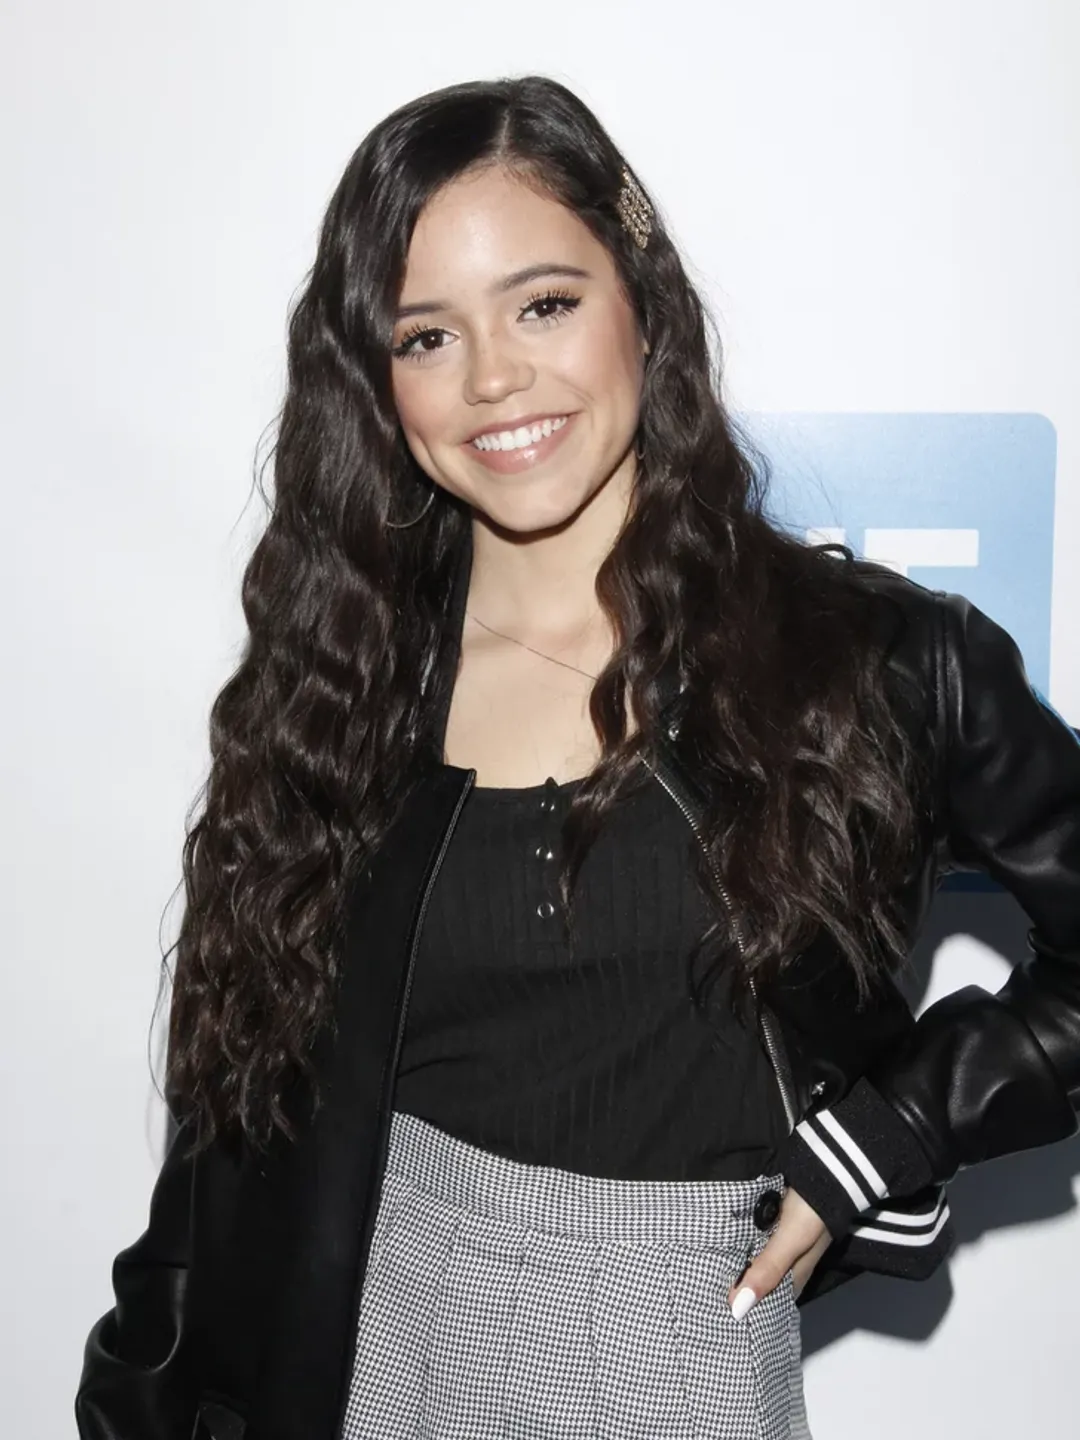 Jenna Ortega who are her parents